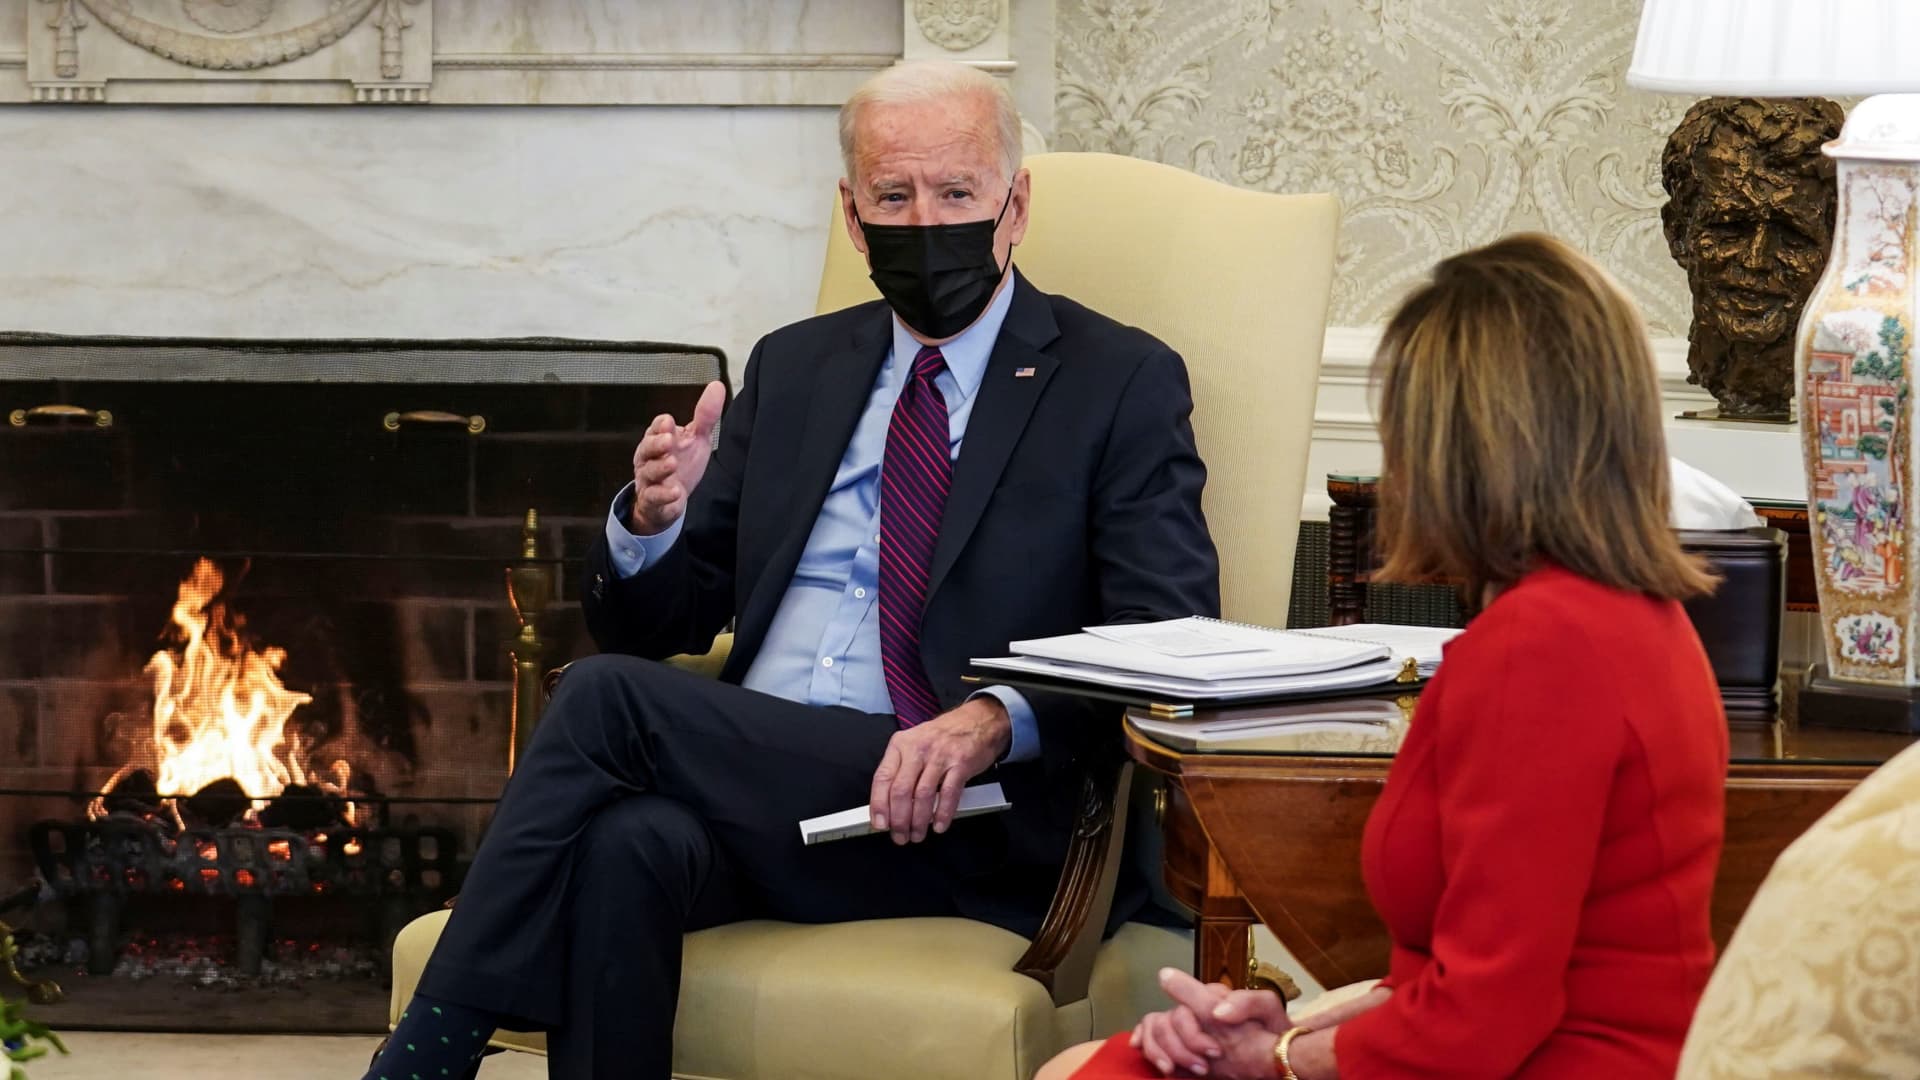 President Joe Biden speaks with beside House Speaker Nancy Pelosi (D-CA) during a meeting with Democratic leaders and chairs of House committees working on coronavirus disease (COVID-19) aid legislation, in the Oval Office at the White House in Washington, February 5, 2021.